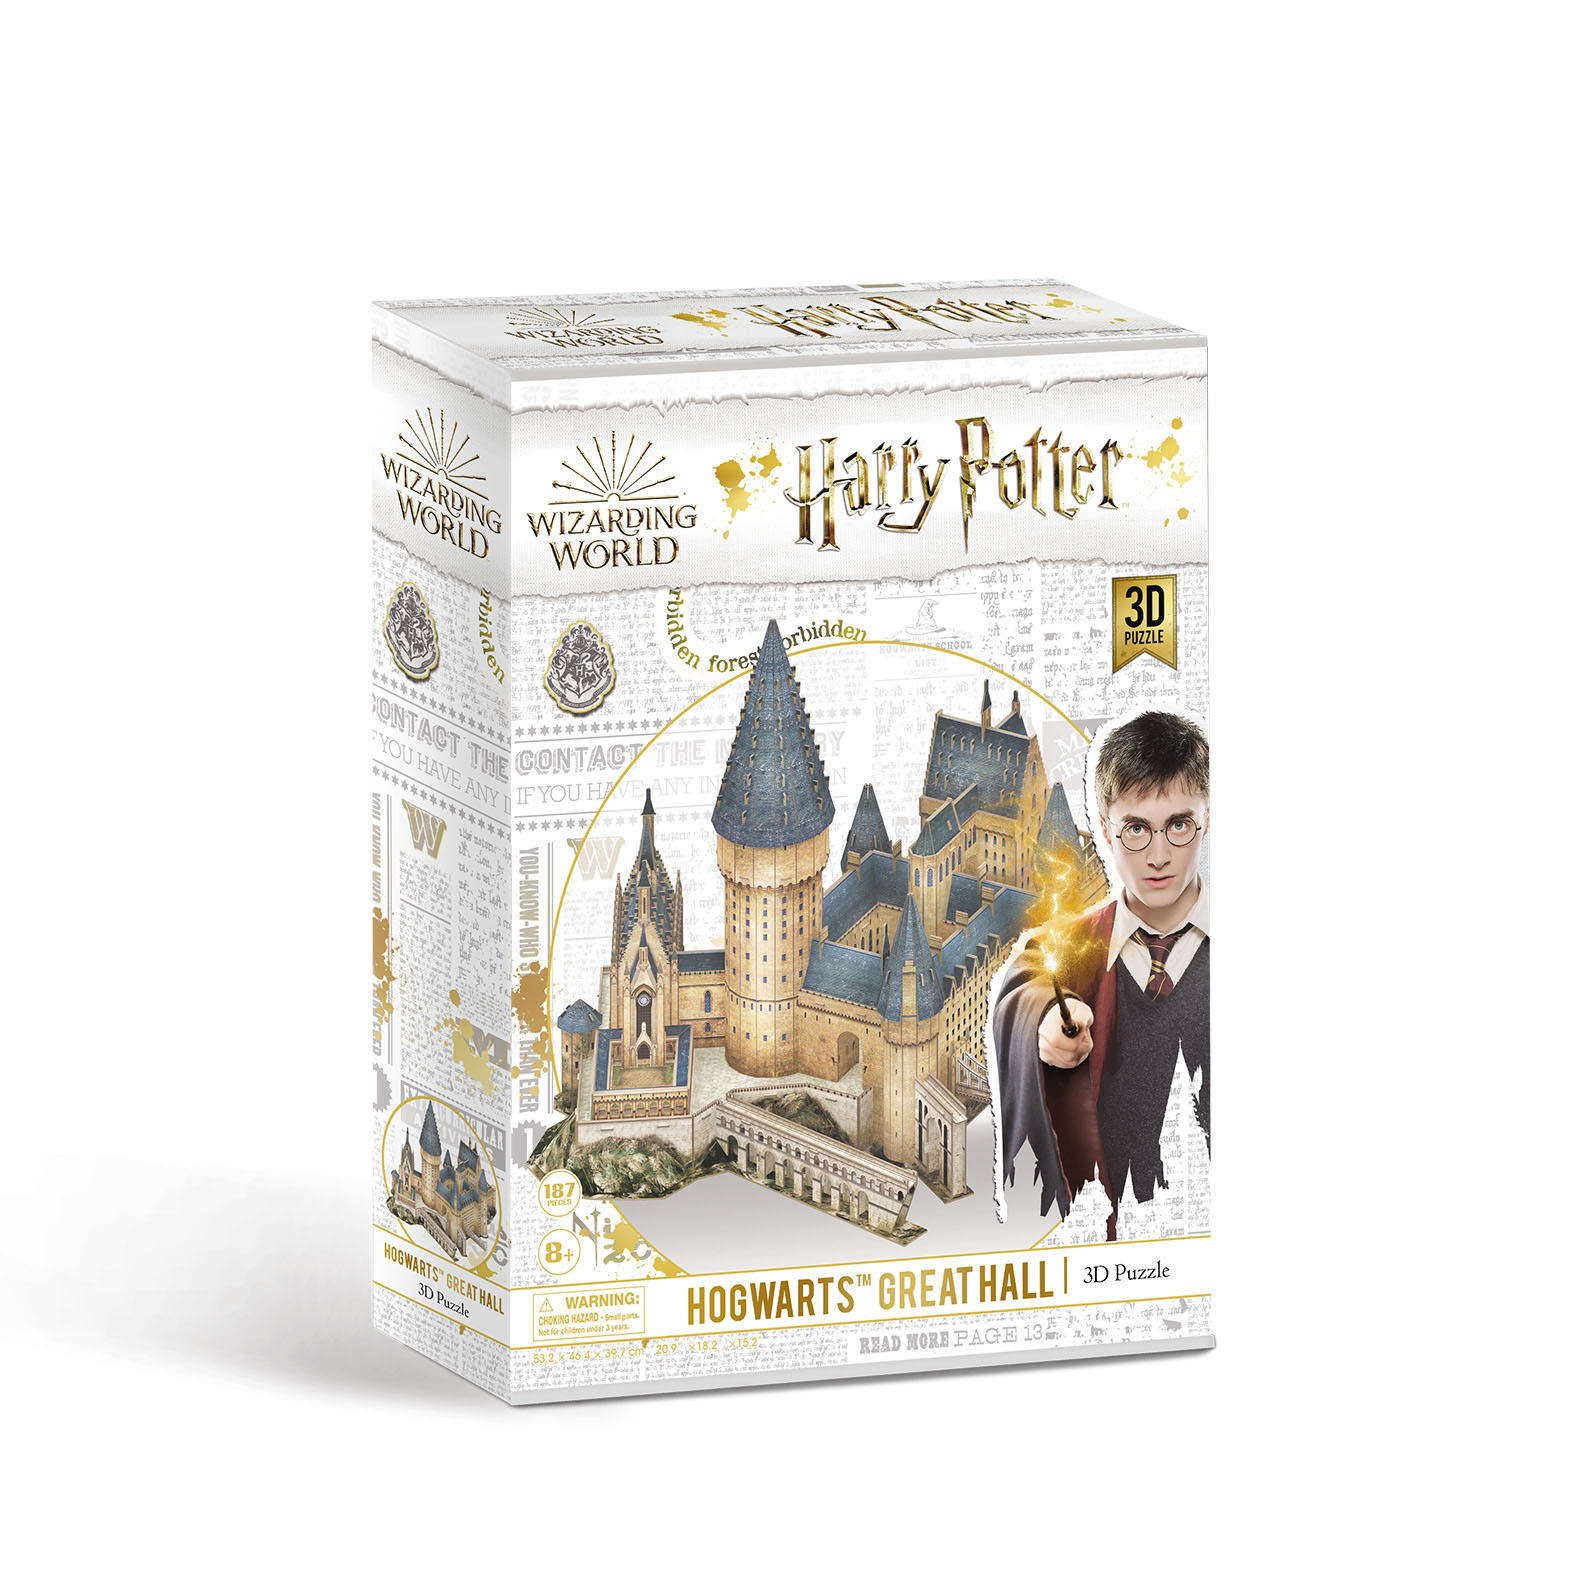 3D Great REVELL Potter Hall Mehrfarbig Harry Puzzle, Hogwarts™